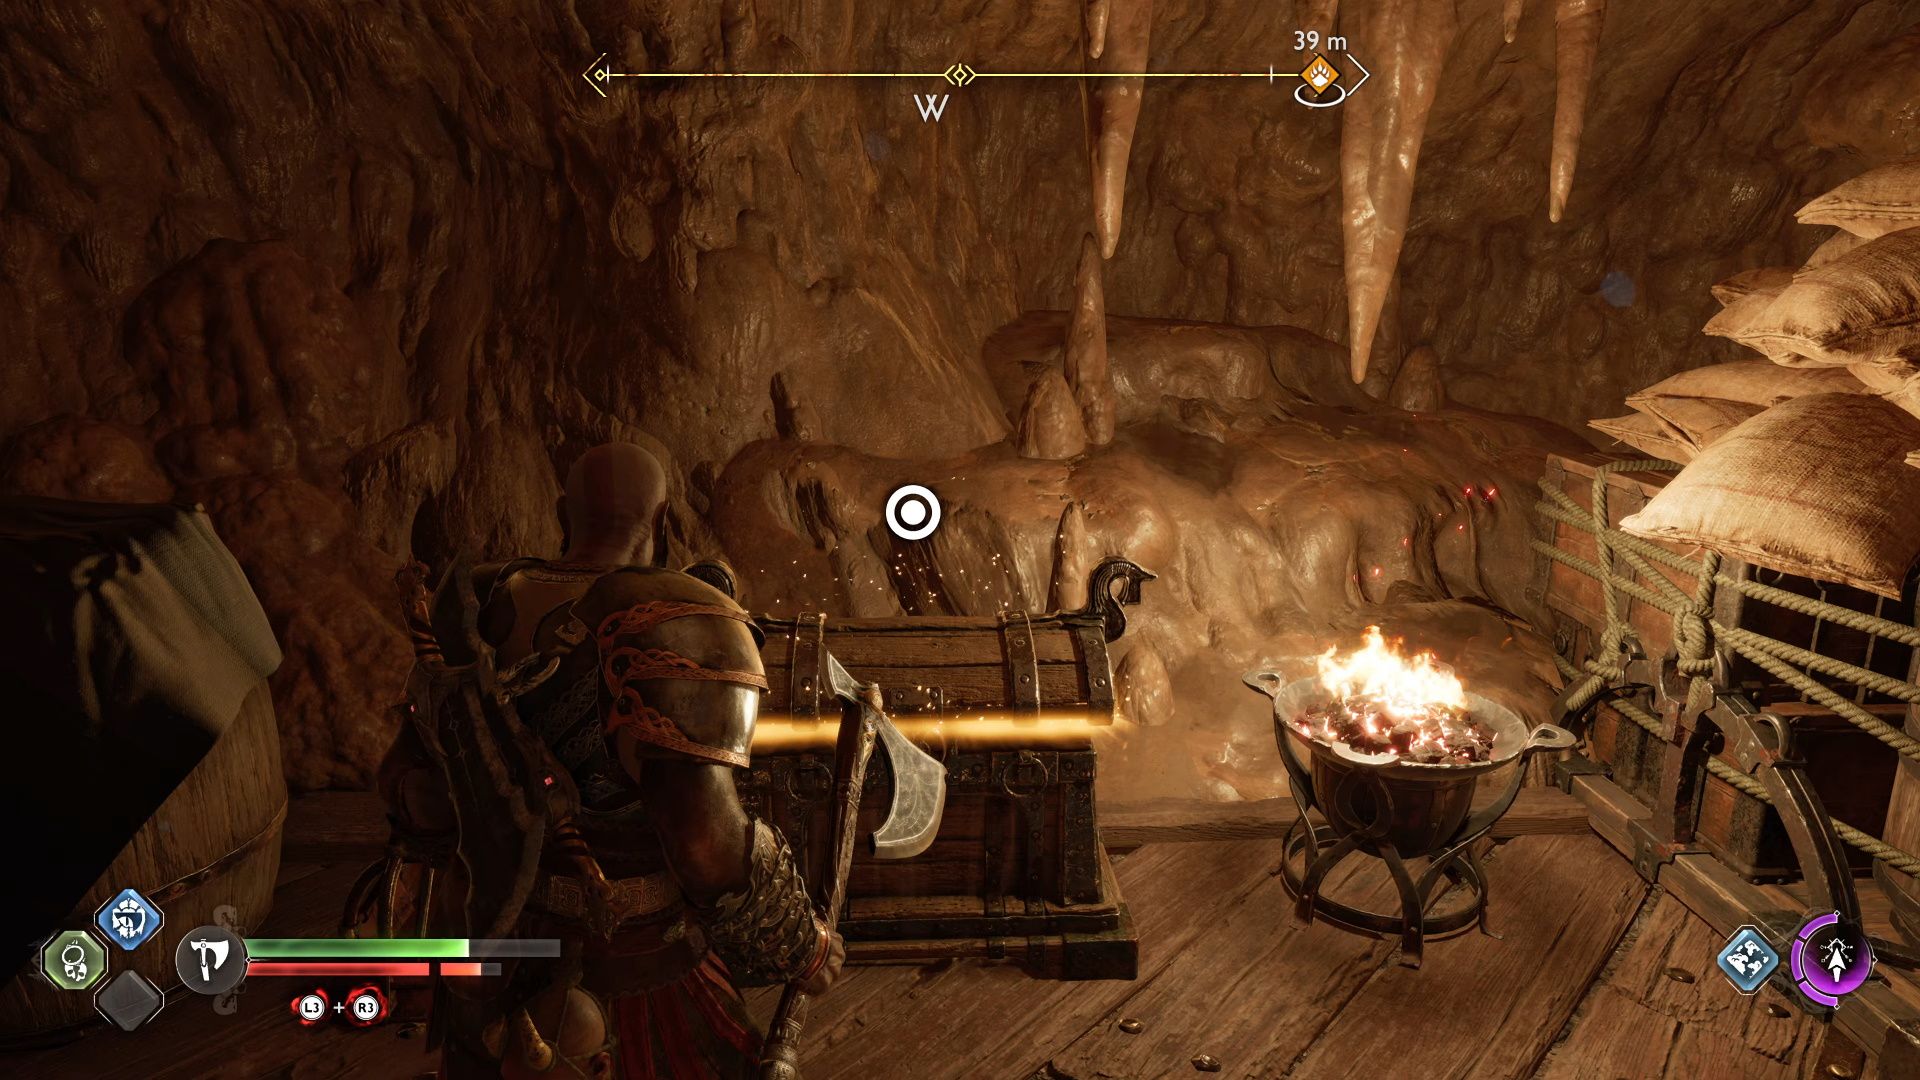 God of War Ragnarok, Hacksilver Chest In The Room With The Grims